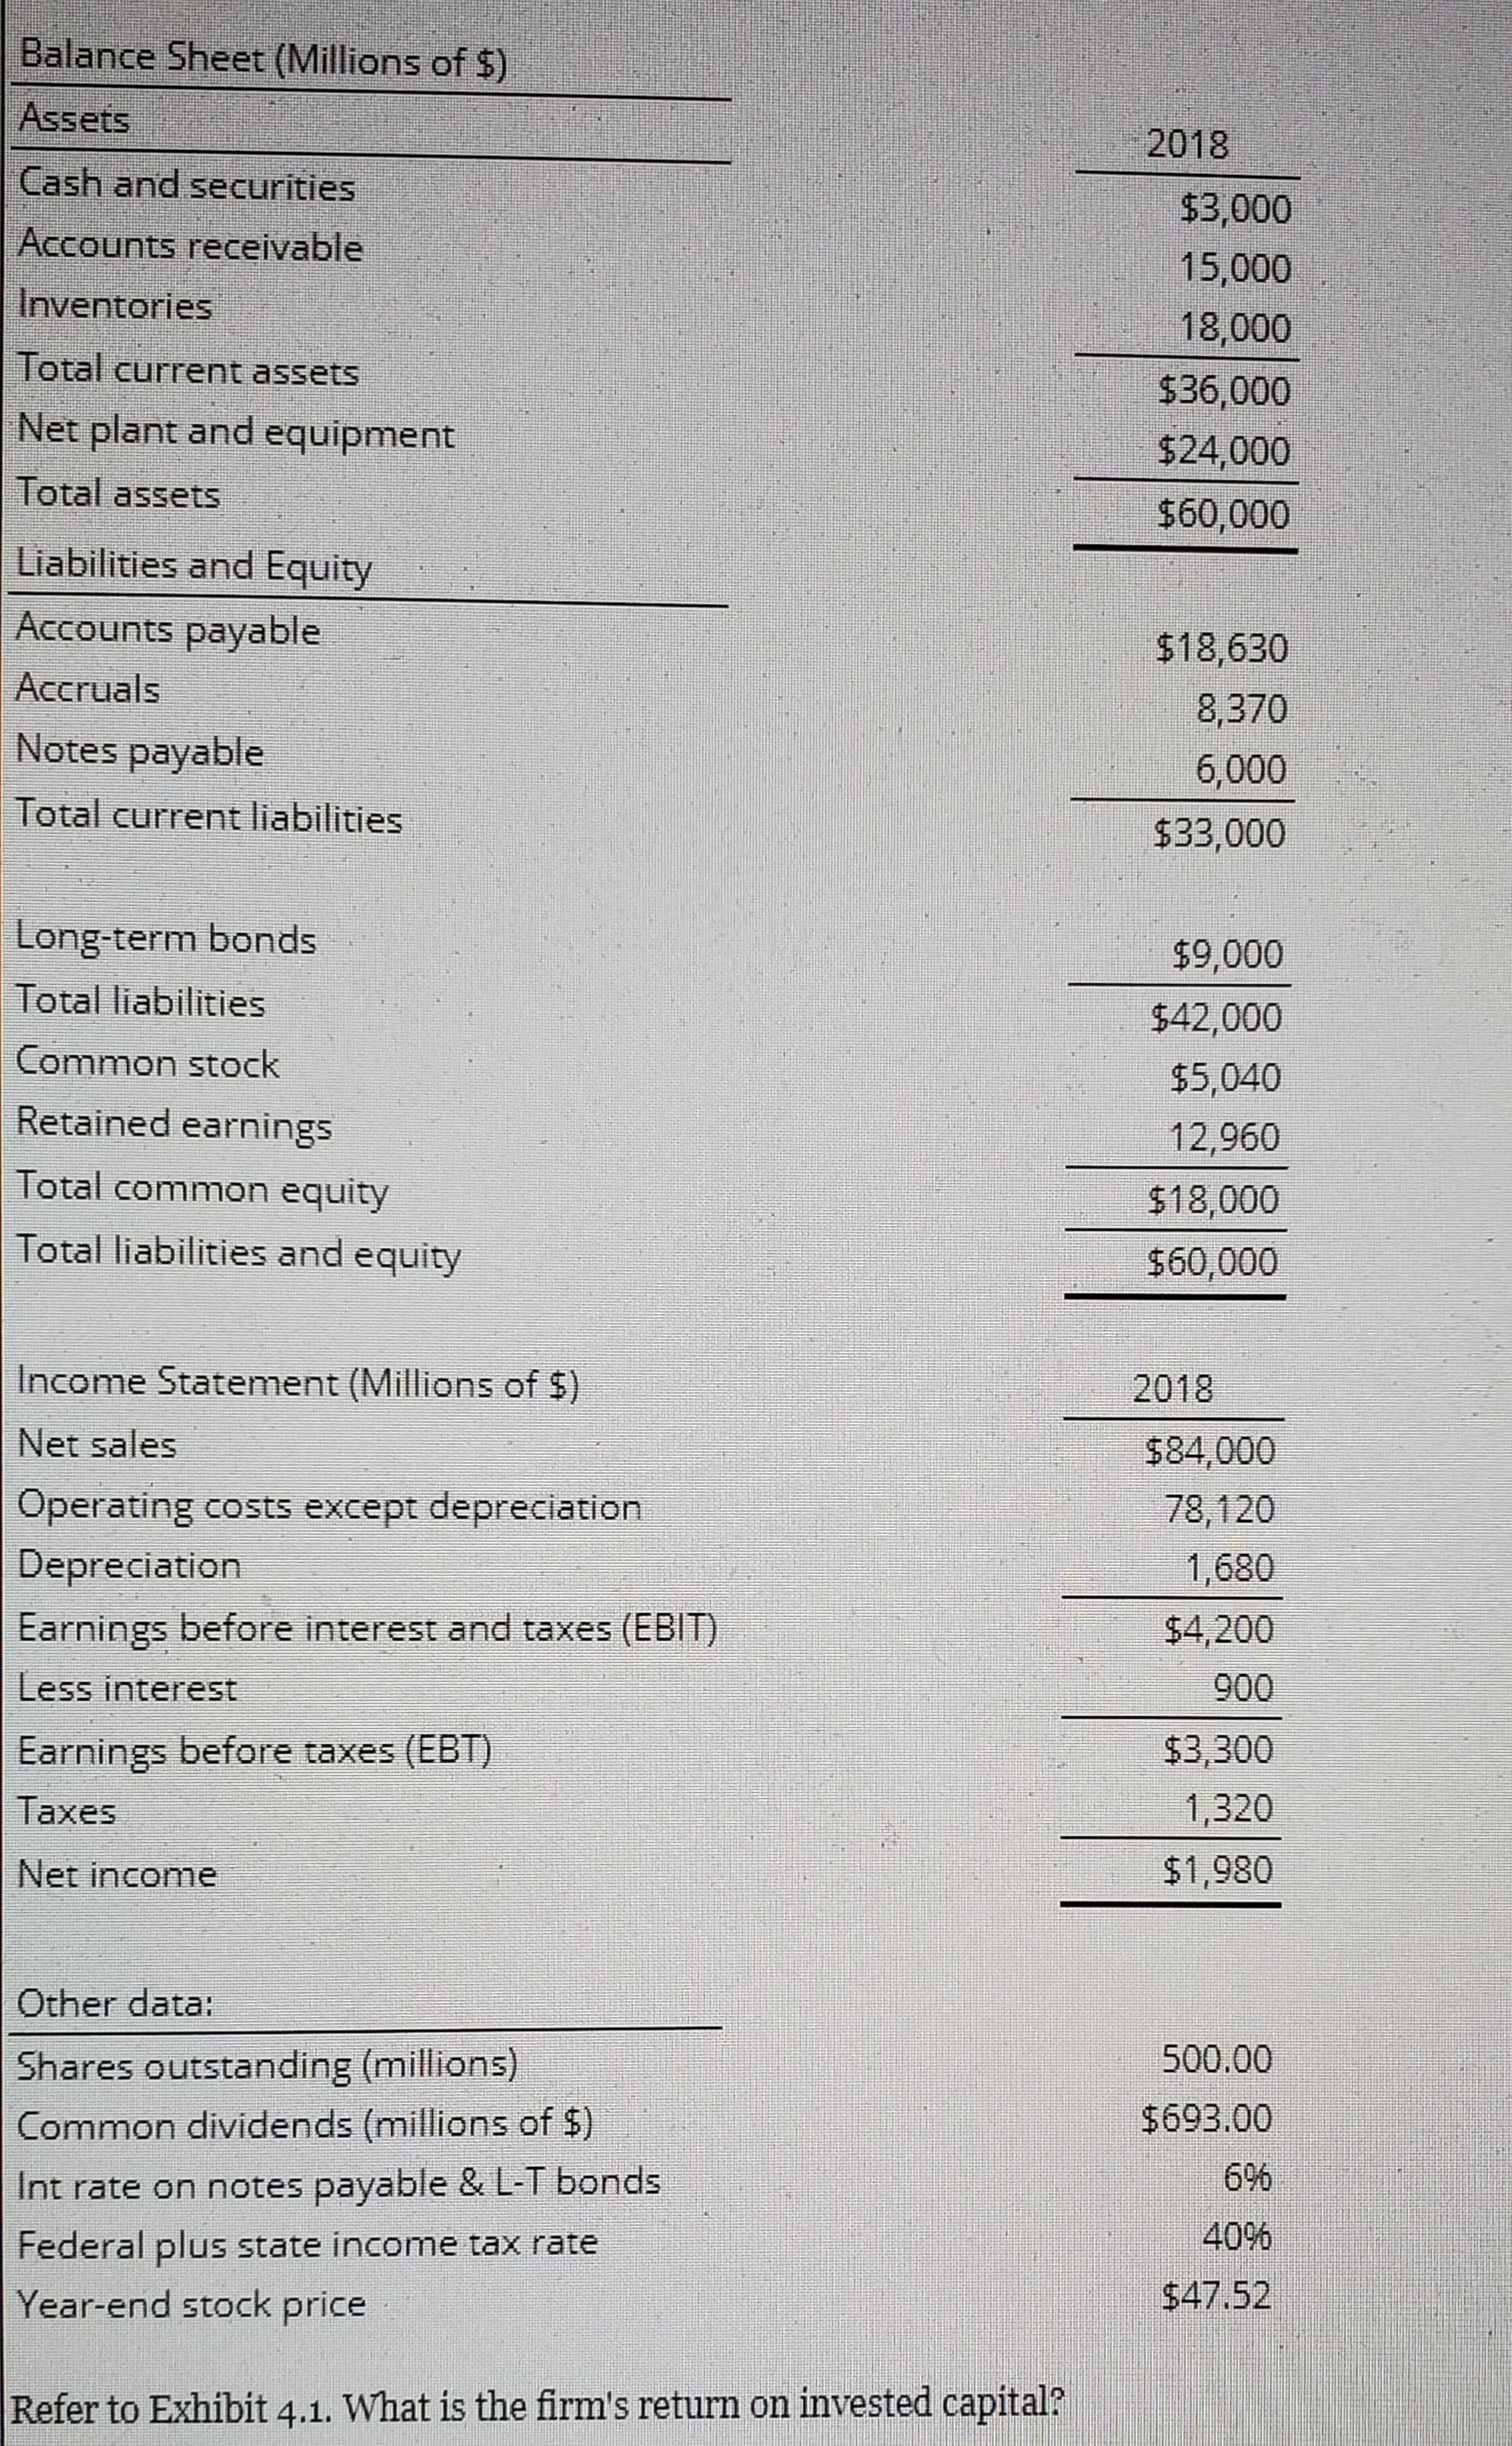 Balance Sheet (Millions of $)
Assets
2018
Cash and securities
$3,000
Accounts receivable
15,000
Inventories
18,000
Total current assets
$36,000
Net plant and equipment
$24,000
Total assetS
$60,000
Liabilities and Equity
